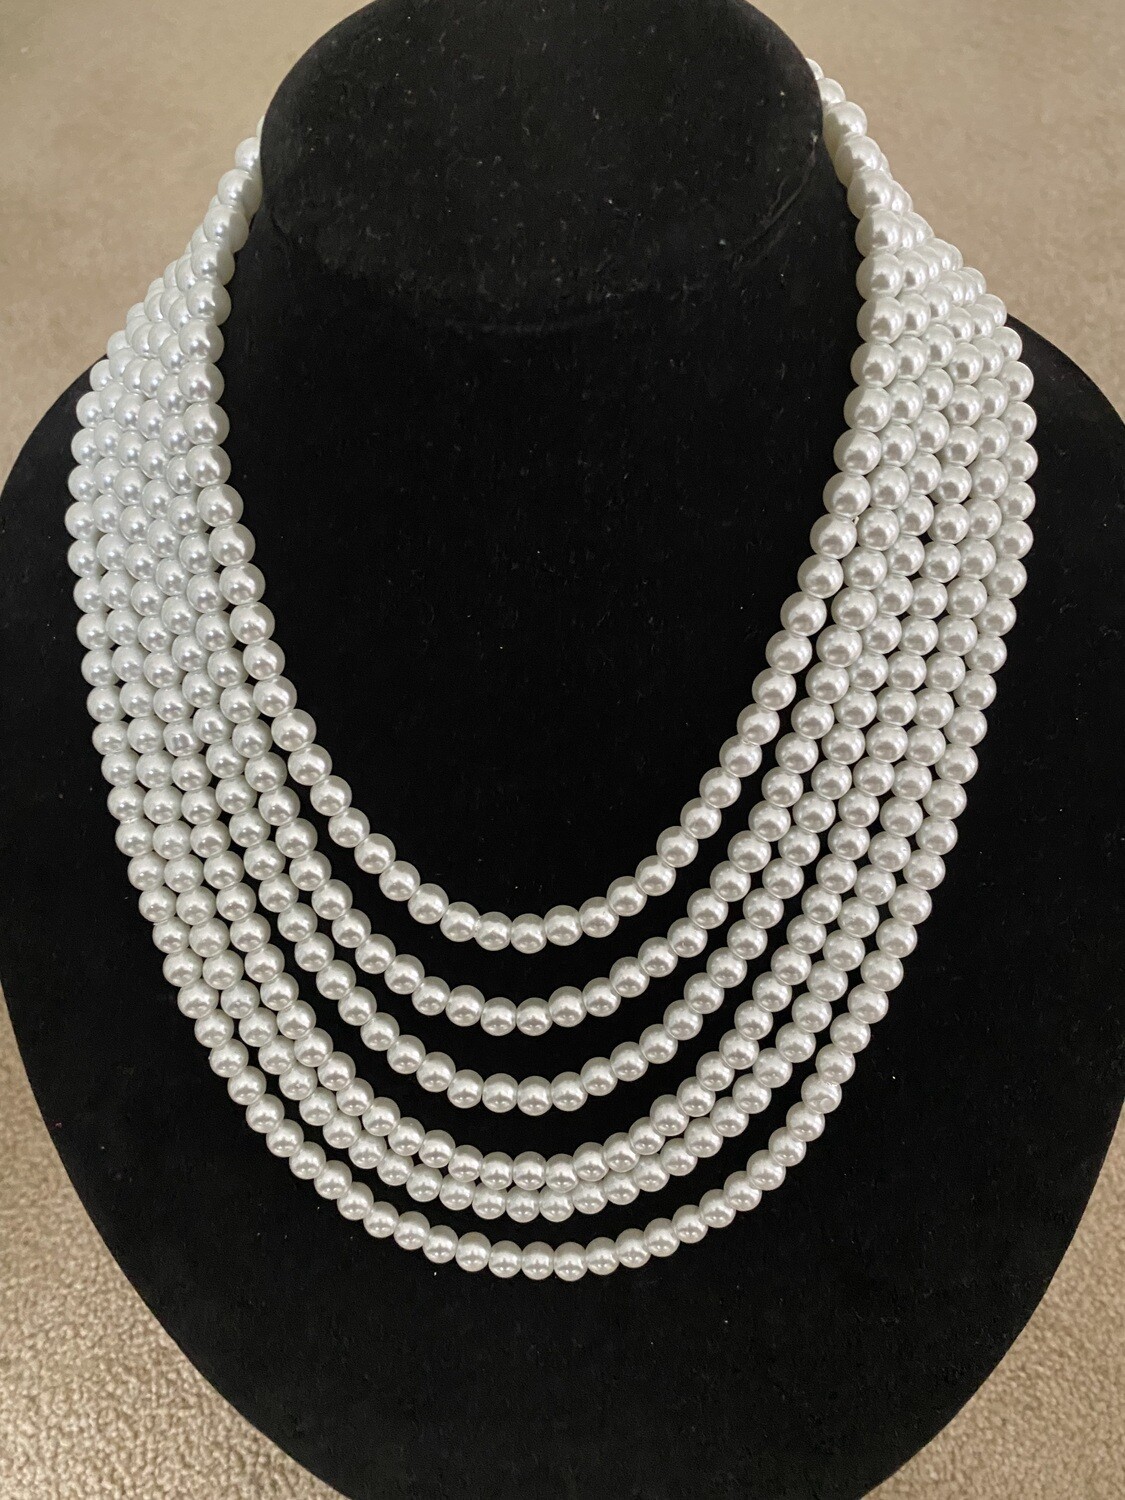 Elegant Pearl Six Row Necklace | Drop Earrings| Jewelry| Birthday Gifts| Mother's Day Gifts| Holiday Gifts| Sorority Gifts| Wedding Jewelry